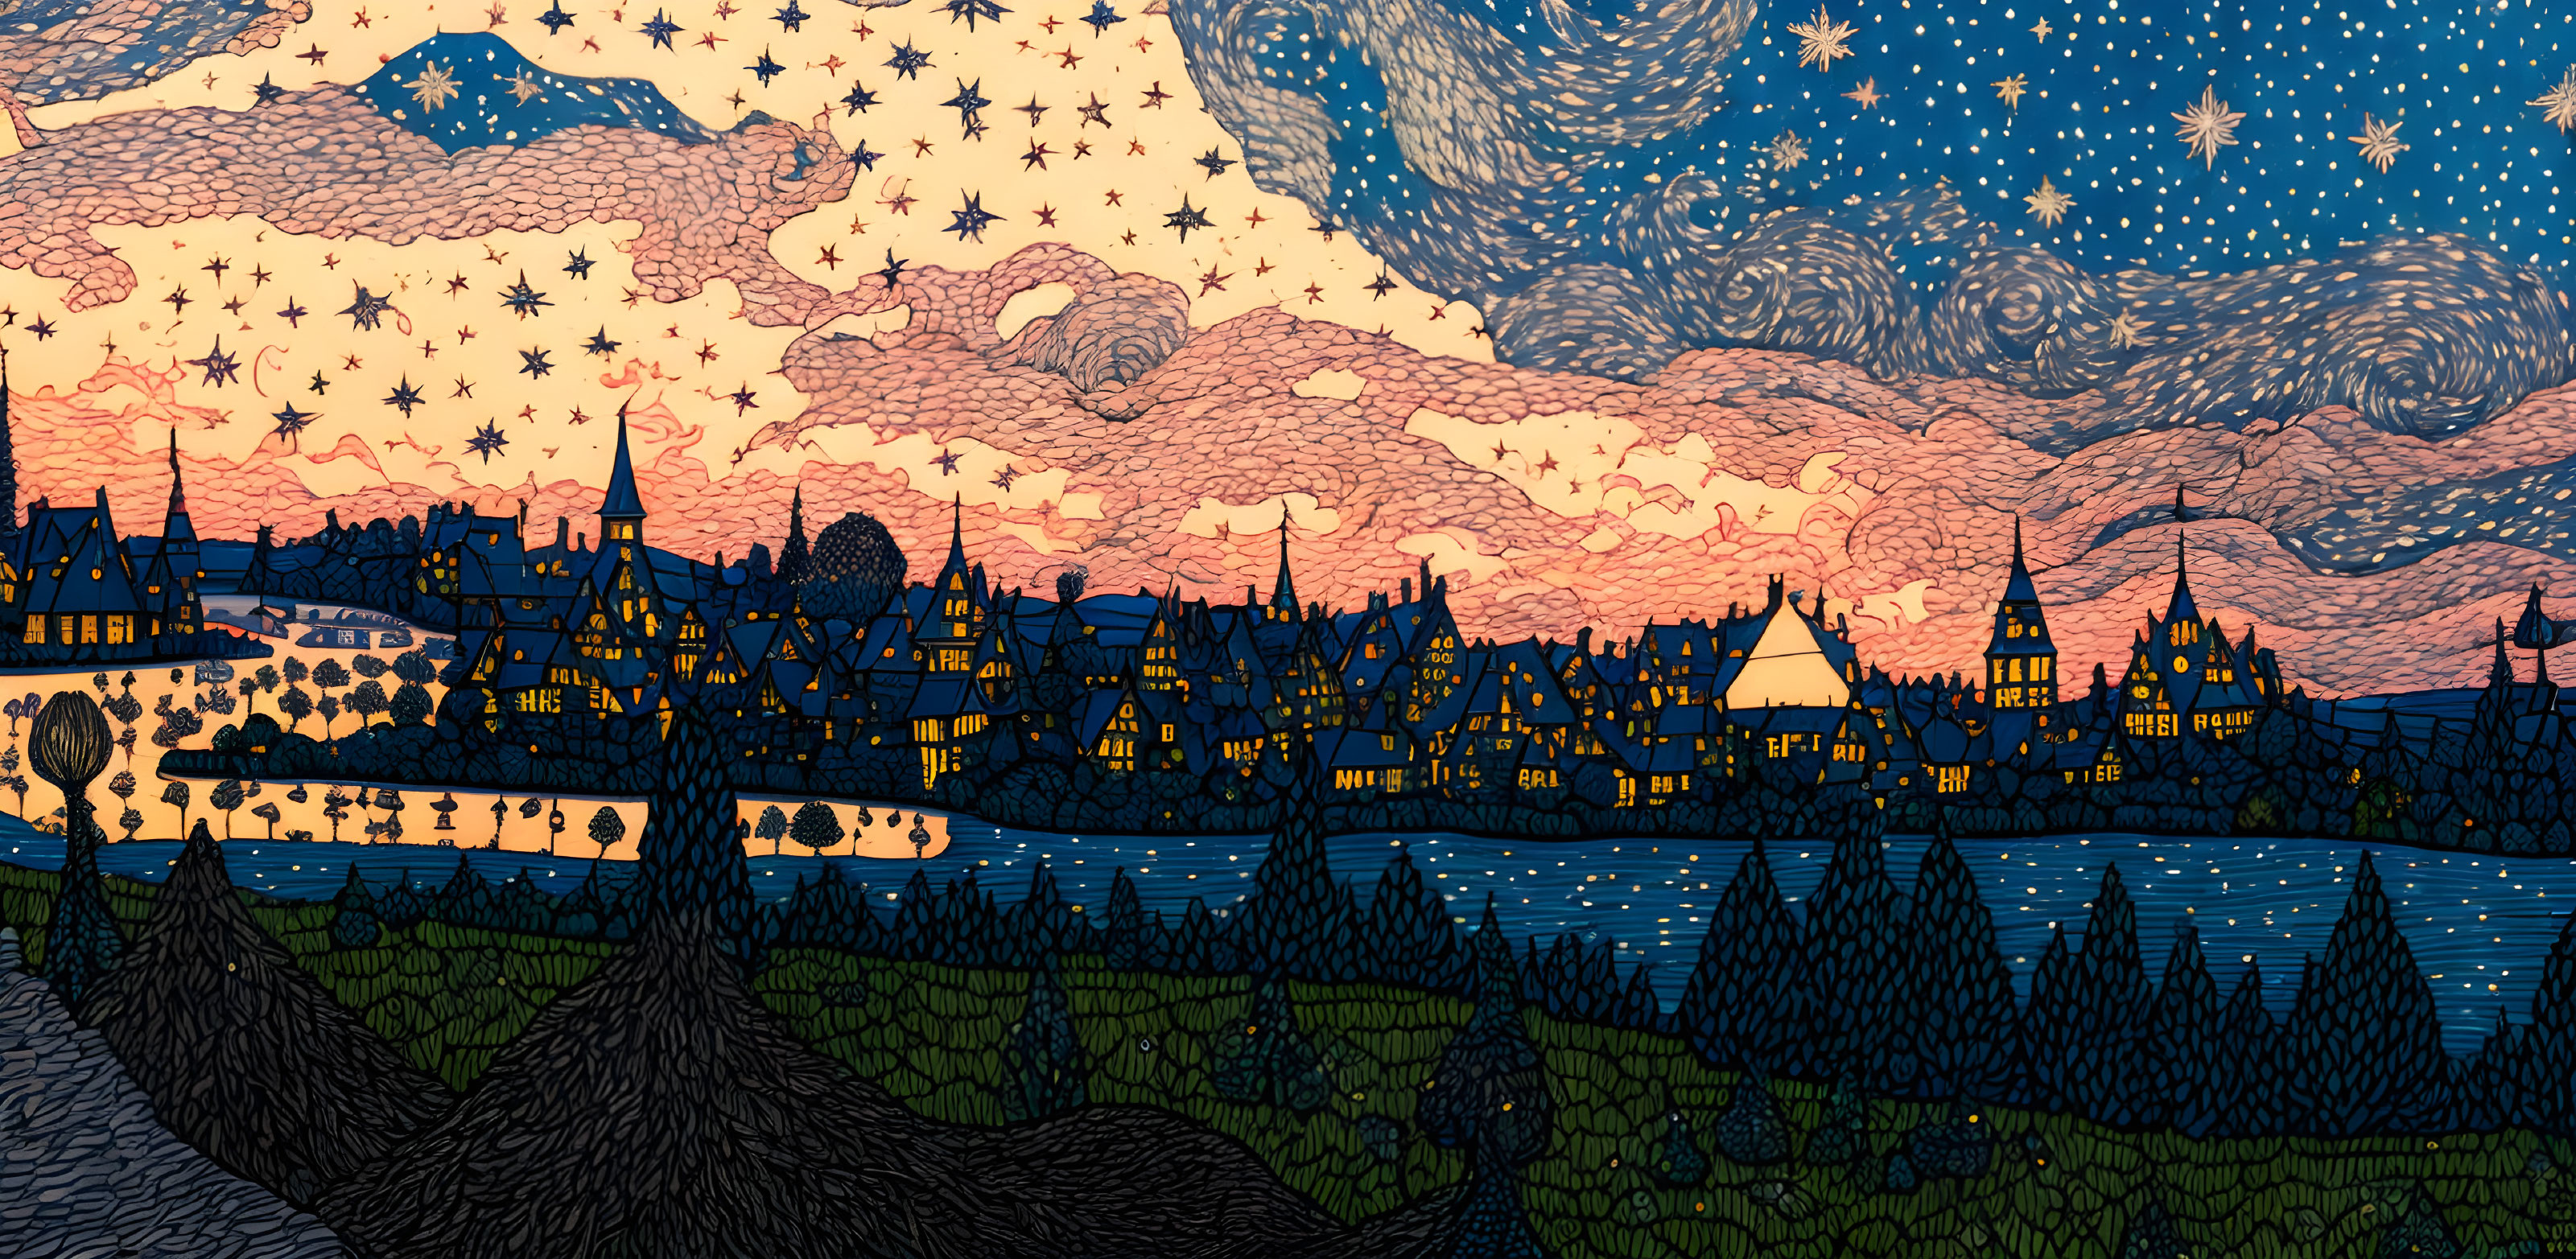 Town at Dusk: Stylized Illustration with Stars and Swirling Clouds